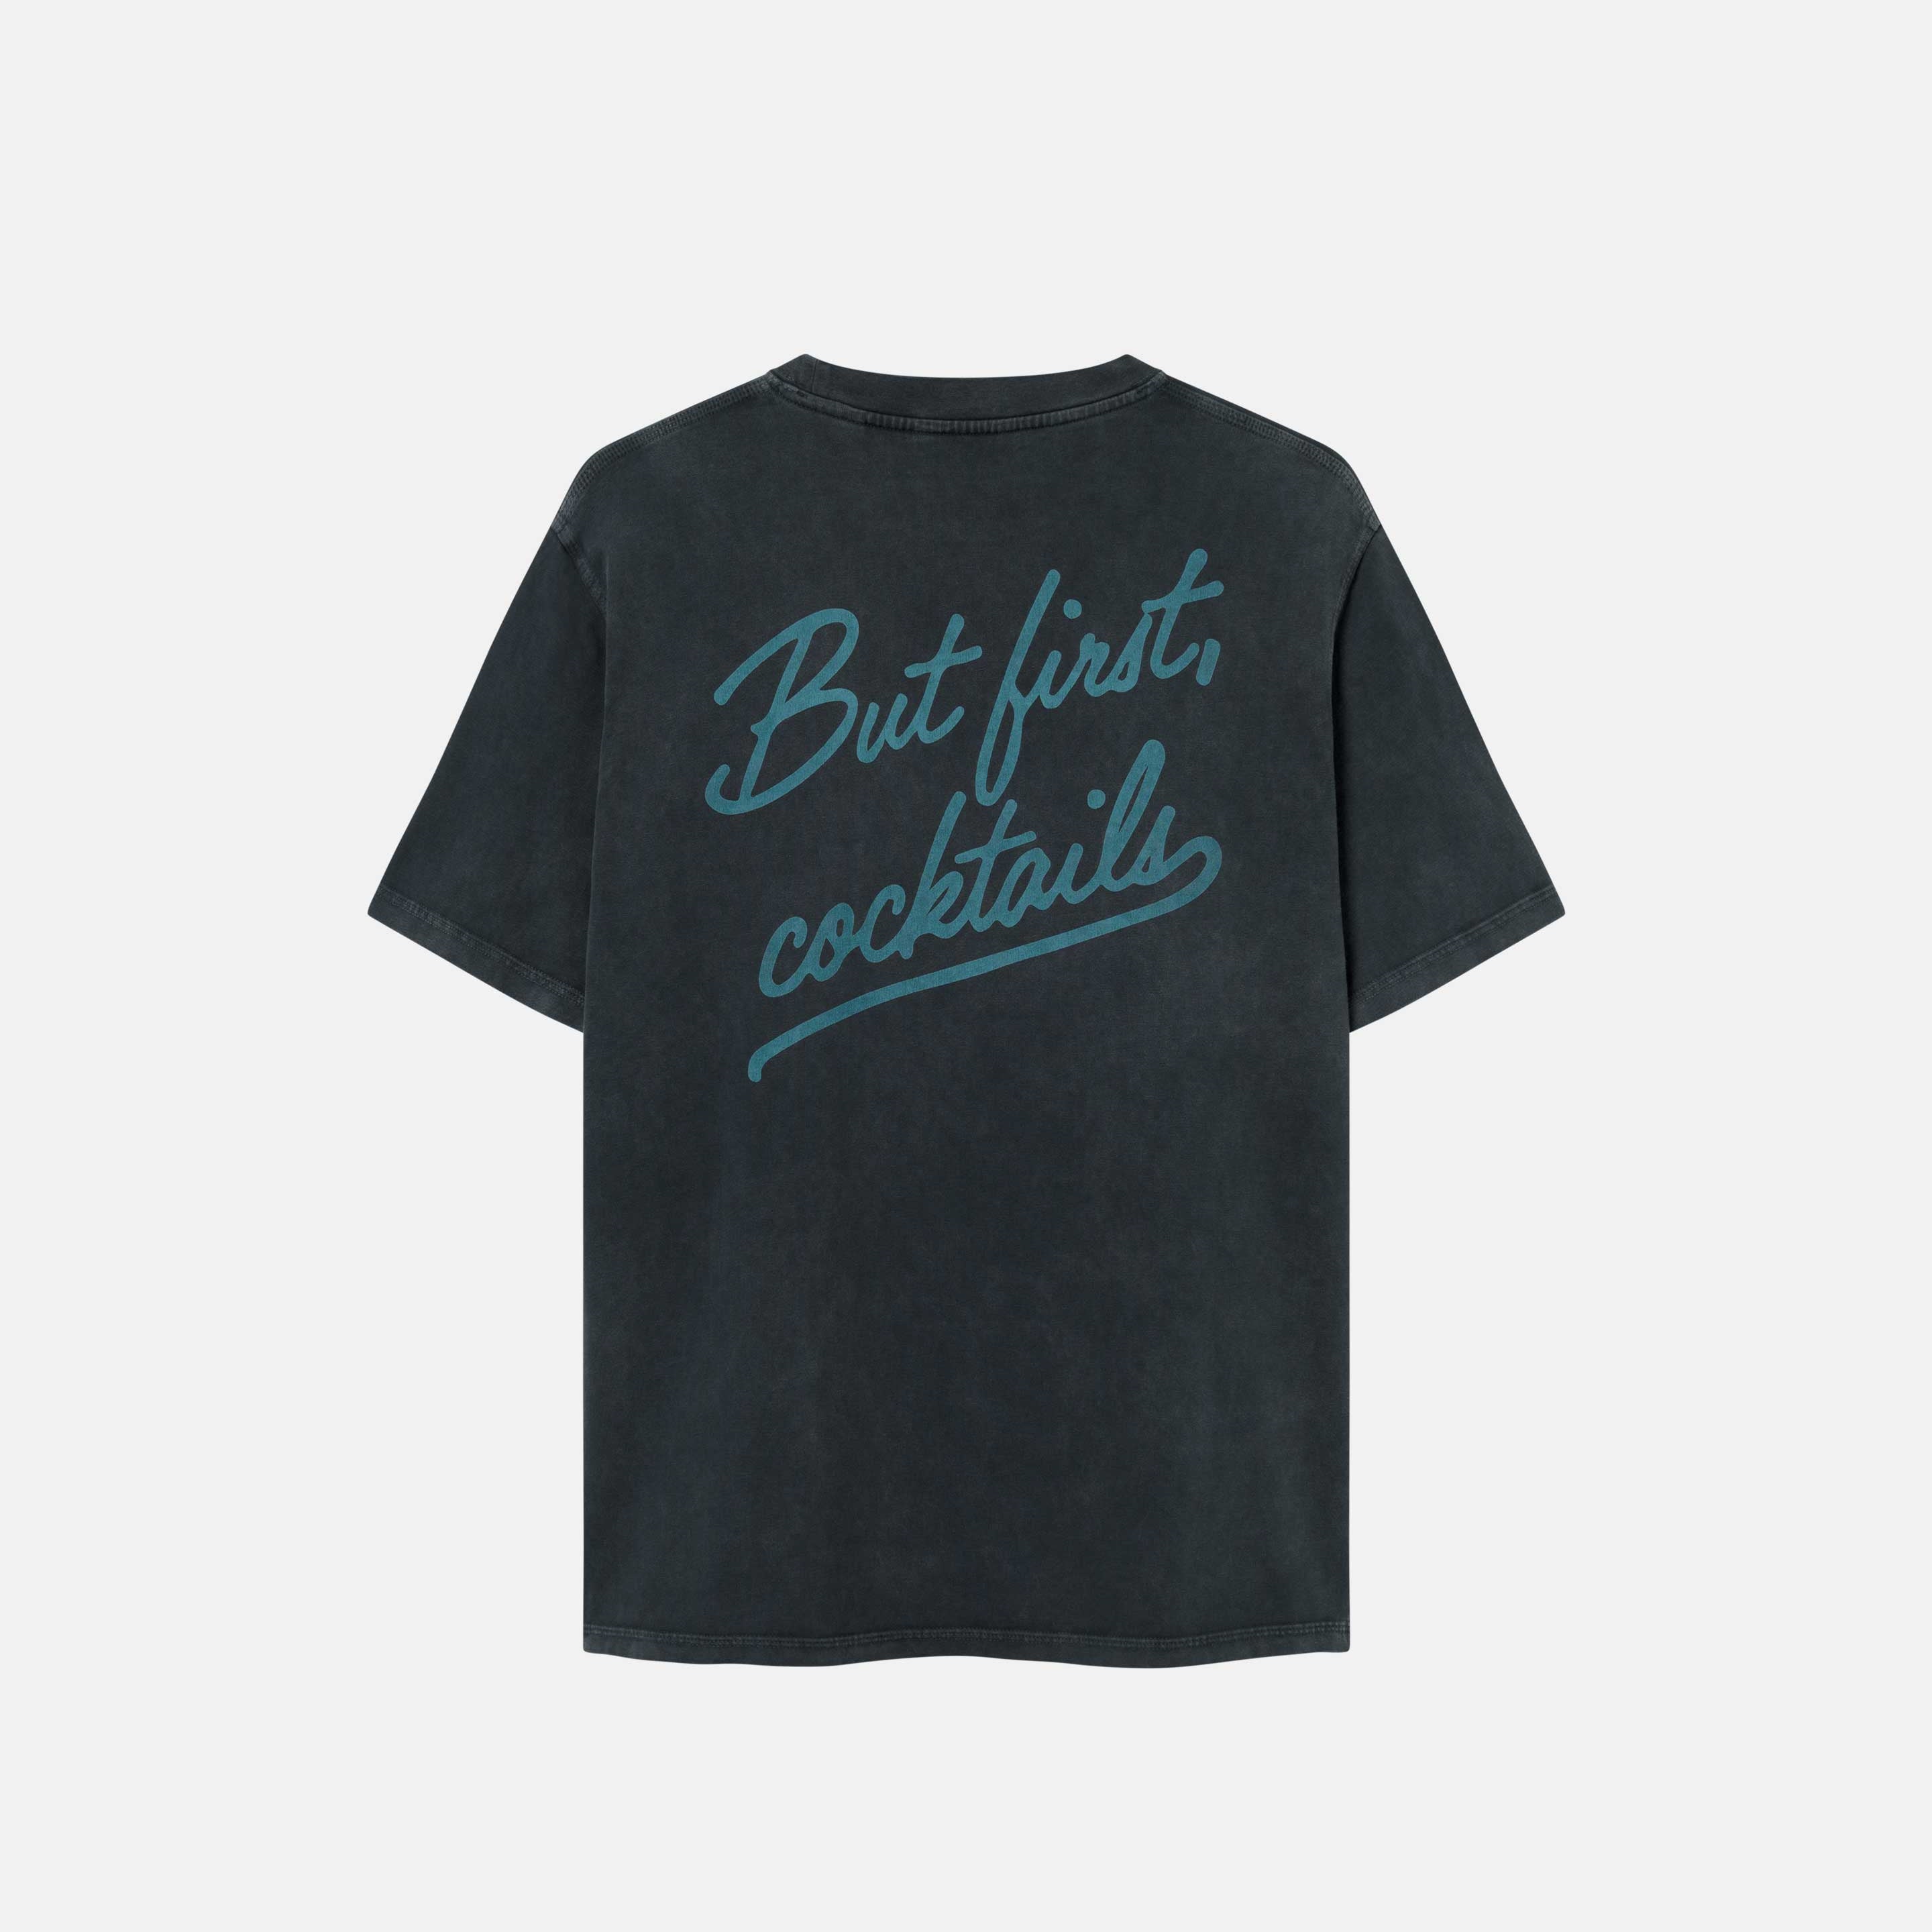 A black garment dyed t-shirt with a green "But first cocktails" text print on the back